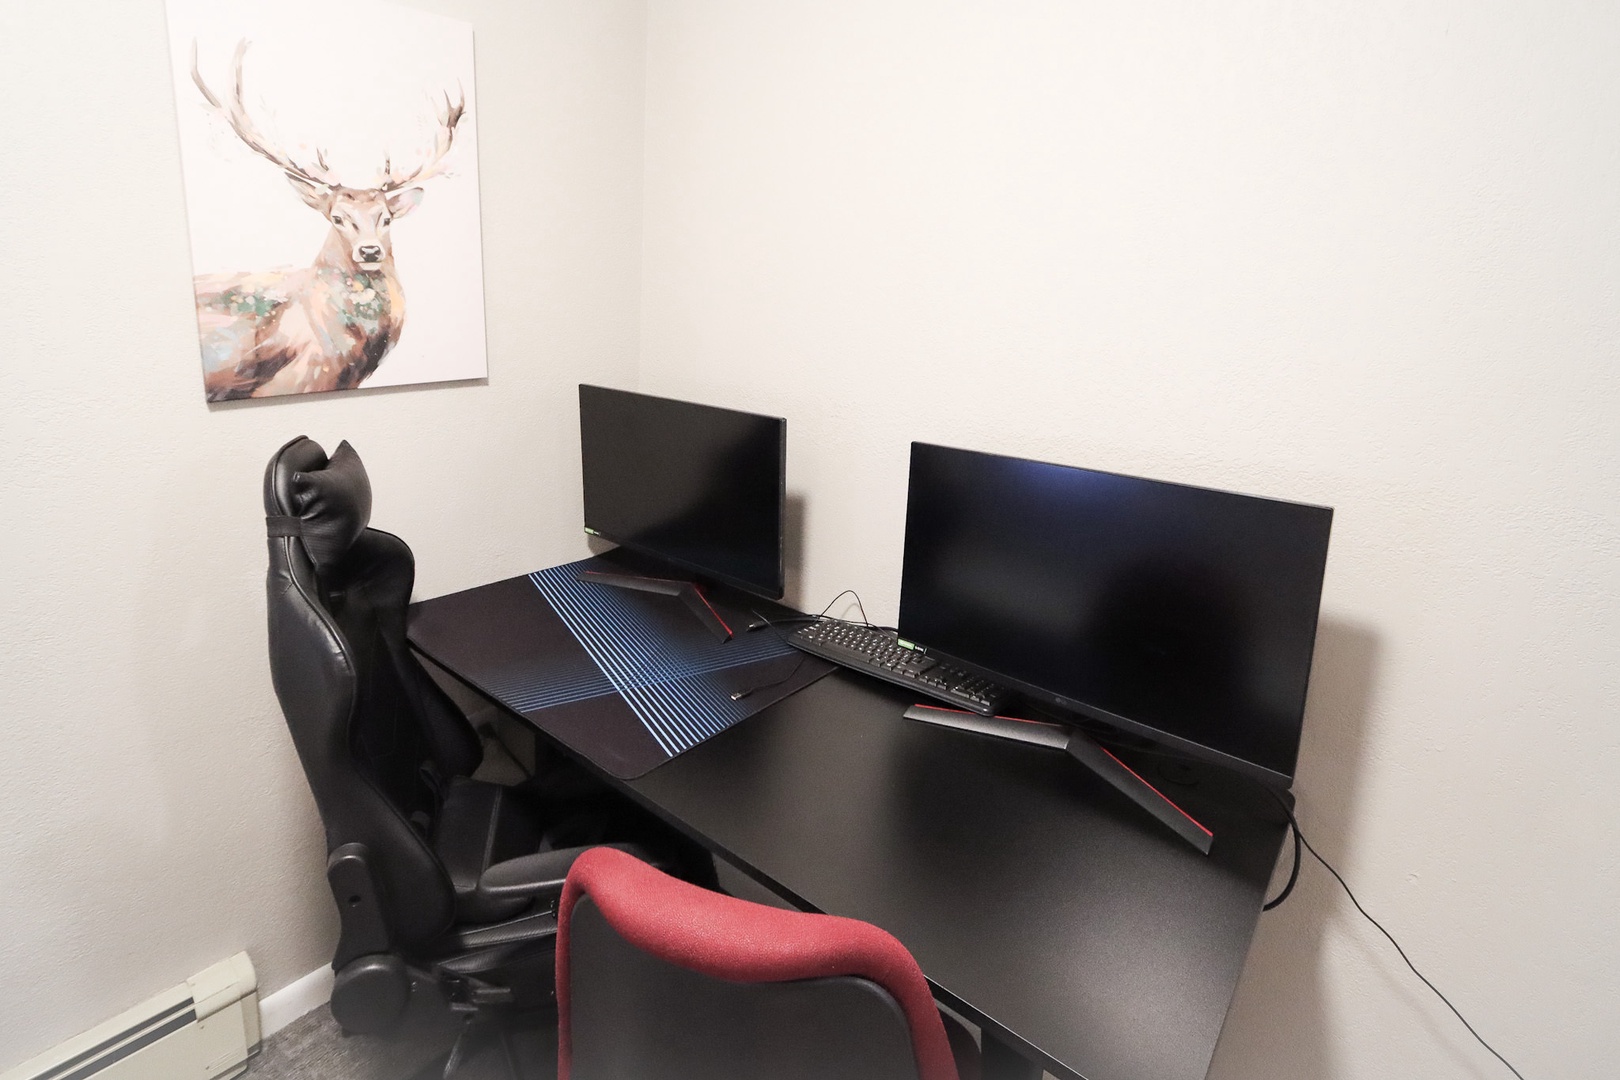 Enjoy the game station/work space